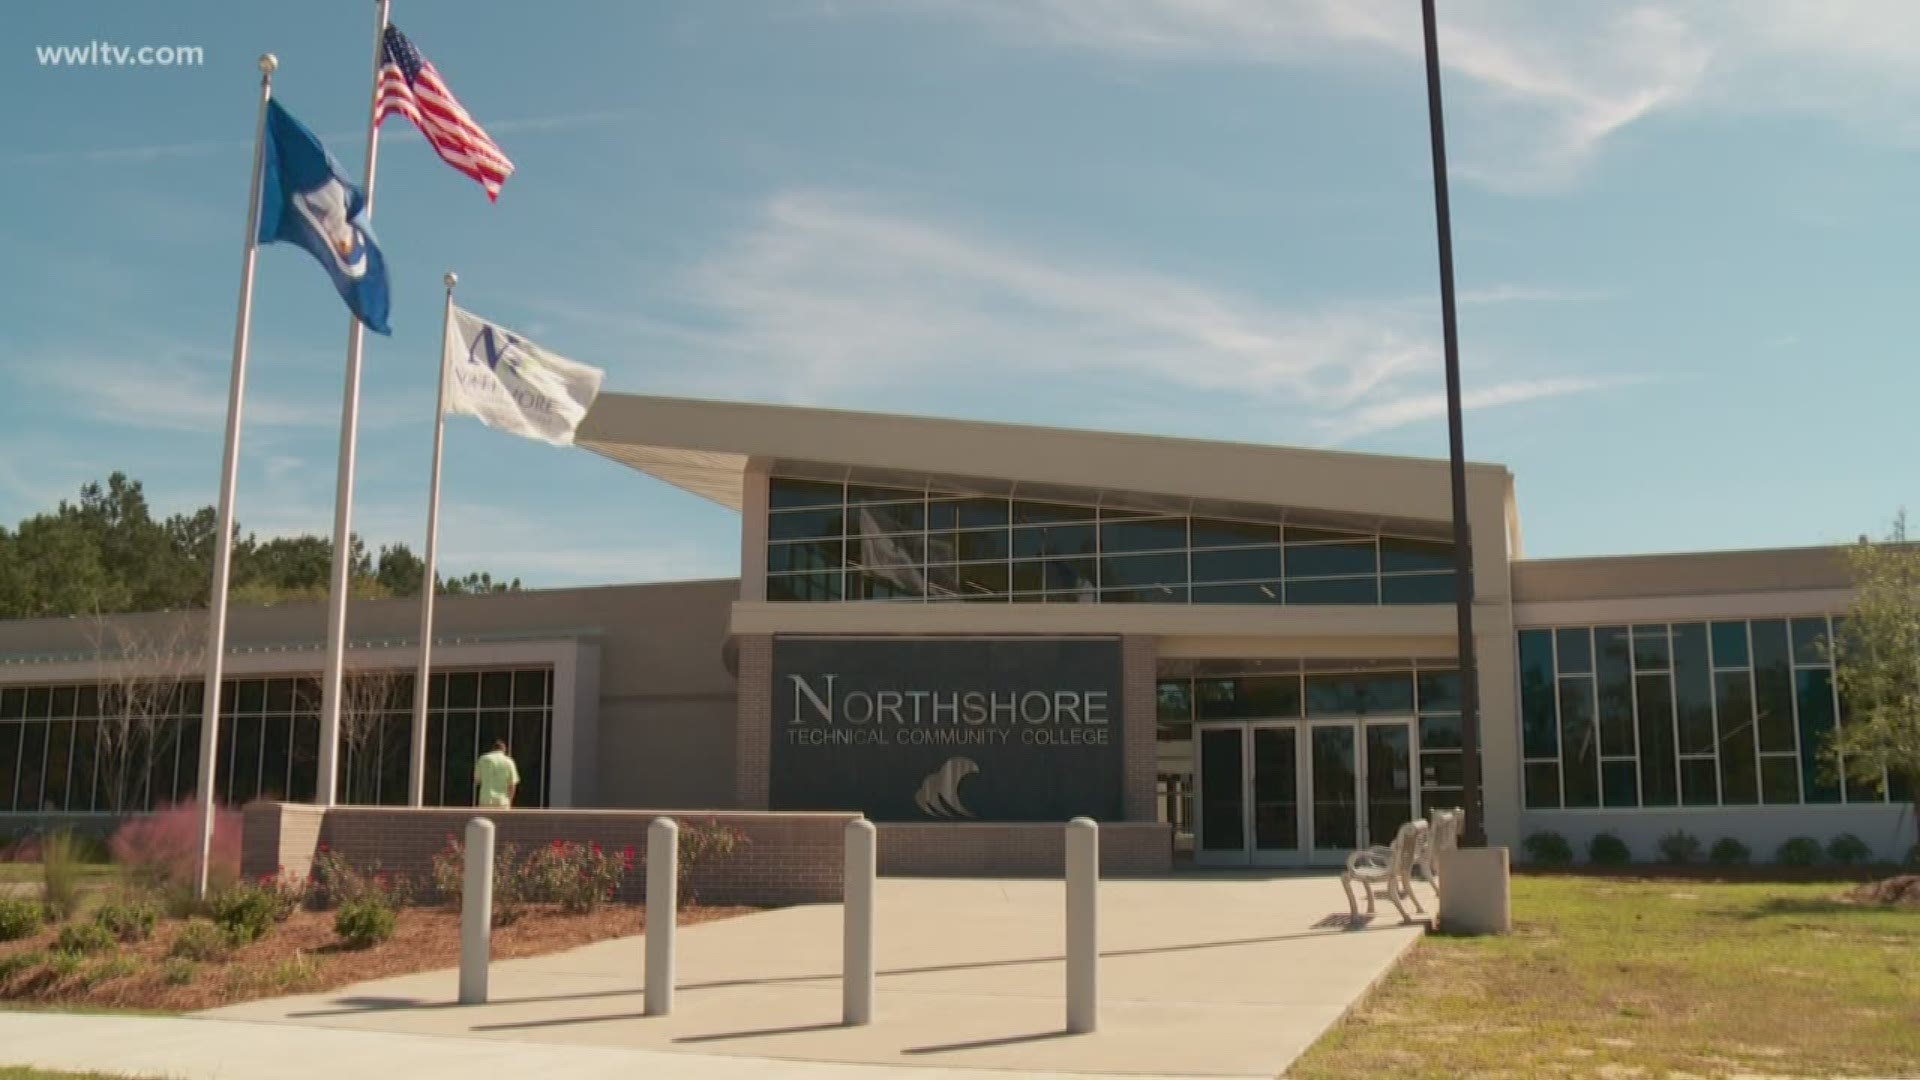 Duke Carter takes us to Northshore Technical Community College to find  a good paying jobs in the Drafting and Design.